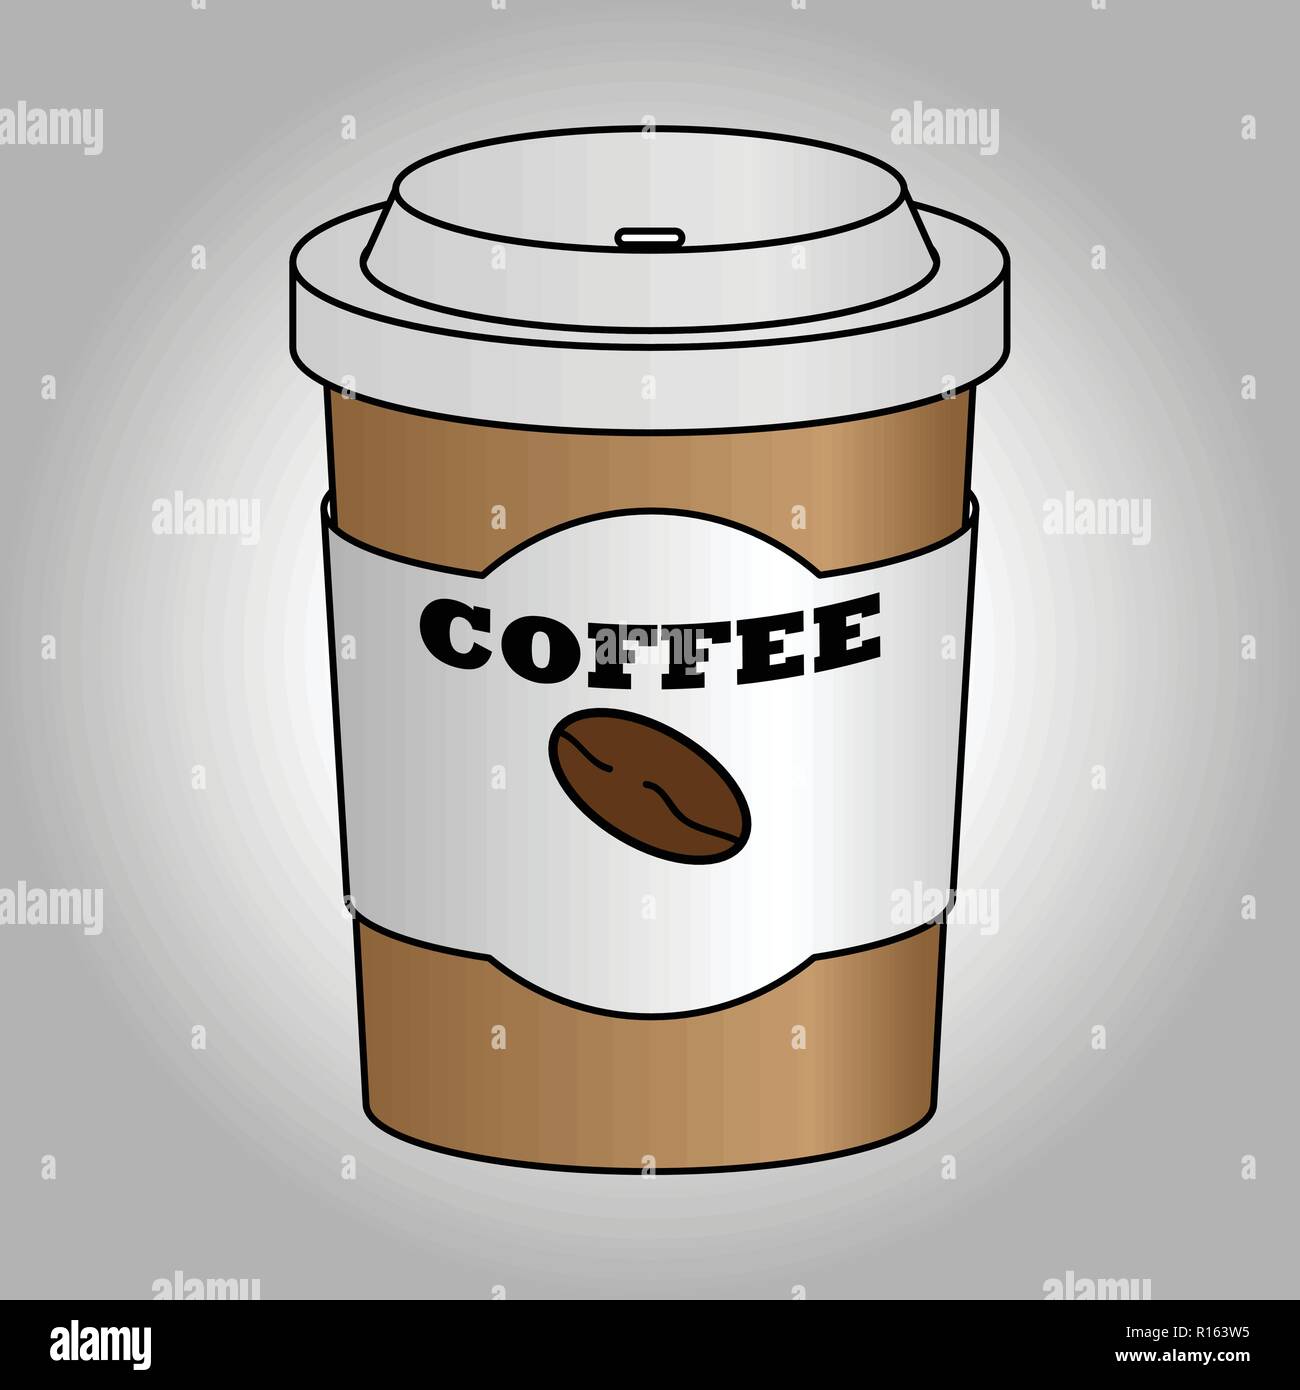 coffe with caffeine cup vector image Stock Vector